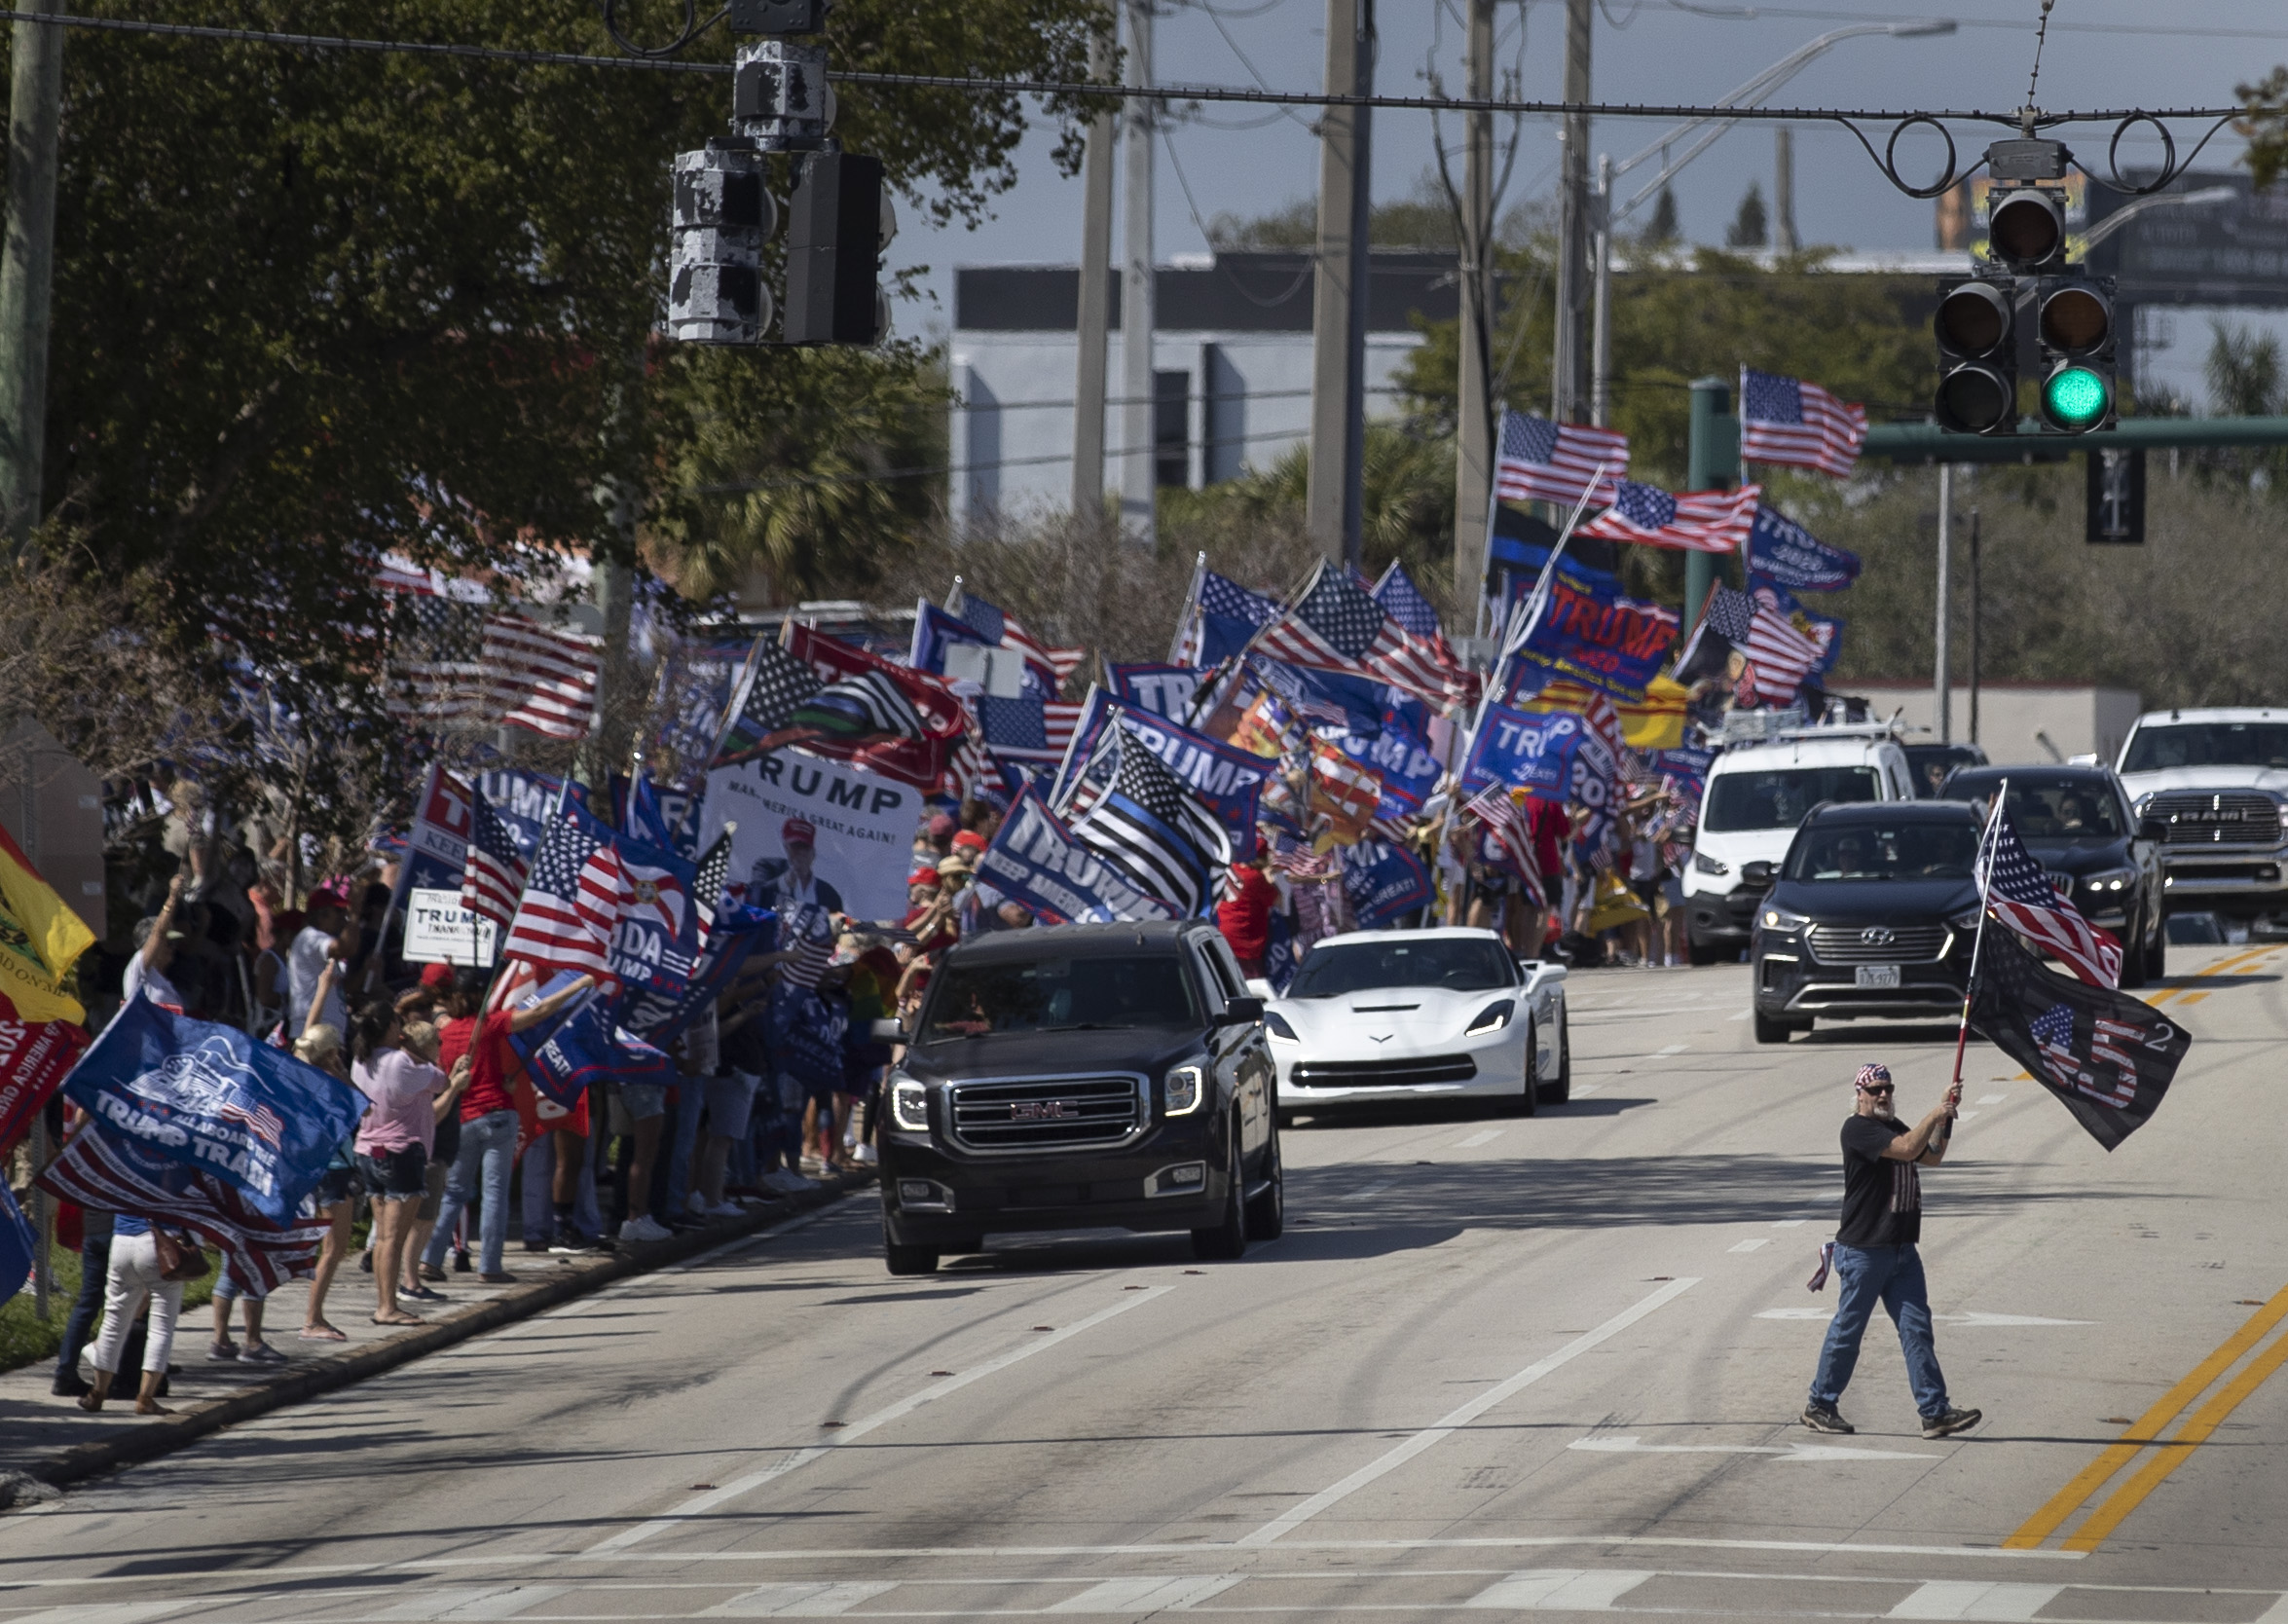 PHOTO: Supporters of former President Donald Trump gather along Southern Blvd near Trump's Mar-a-Lago home on Feb. 15, 2021, in West Palm Beach, Fla.